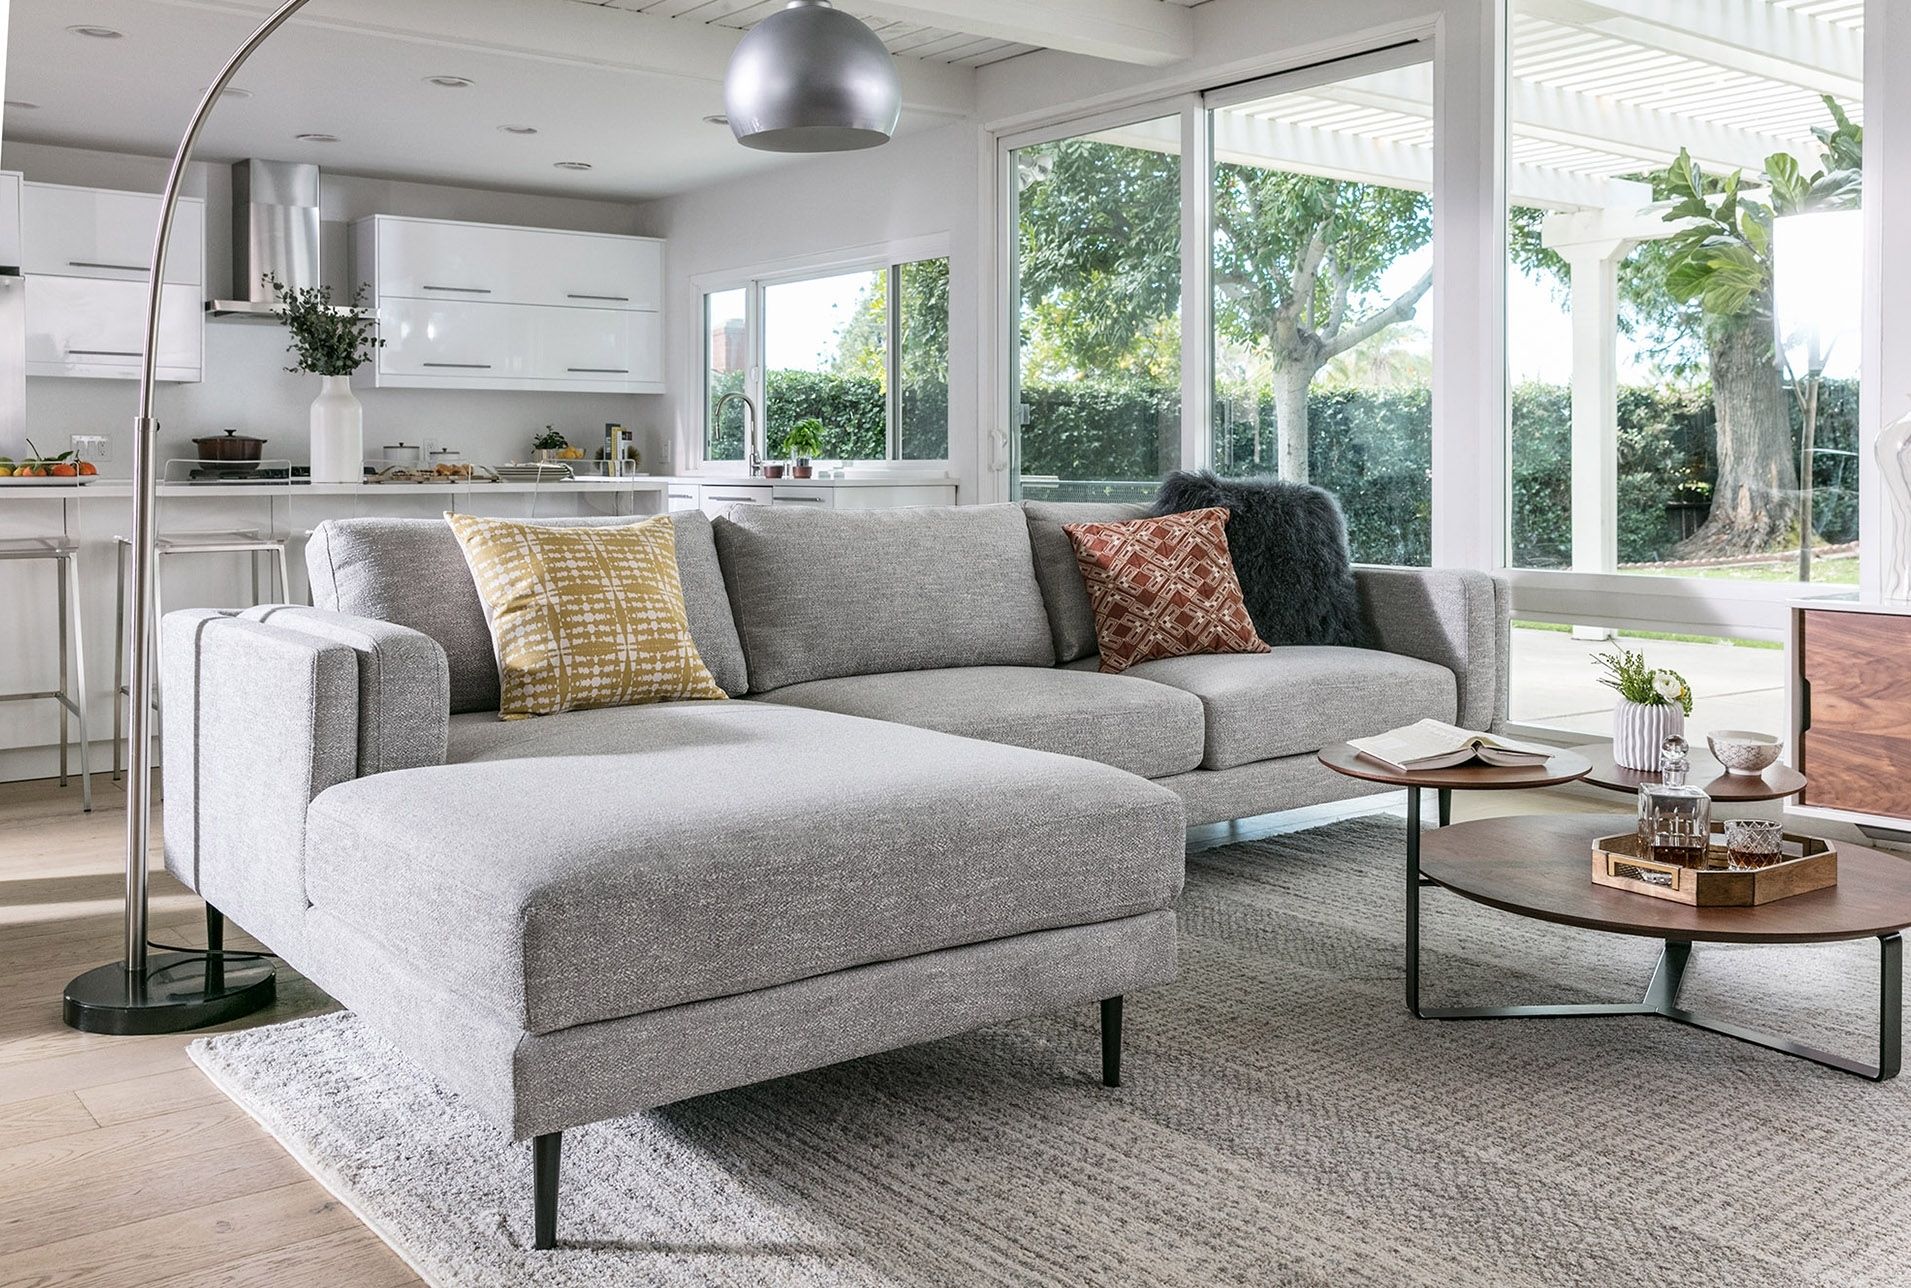 Aquarius Light Grey 2 Piece Sectional W/laf Chaise | Products In Aquarius Light Grey 2 Piece Sectionals With Laf Chaise (Photo 6437 of 7825)